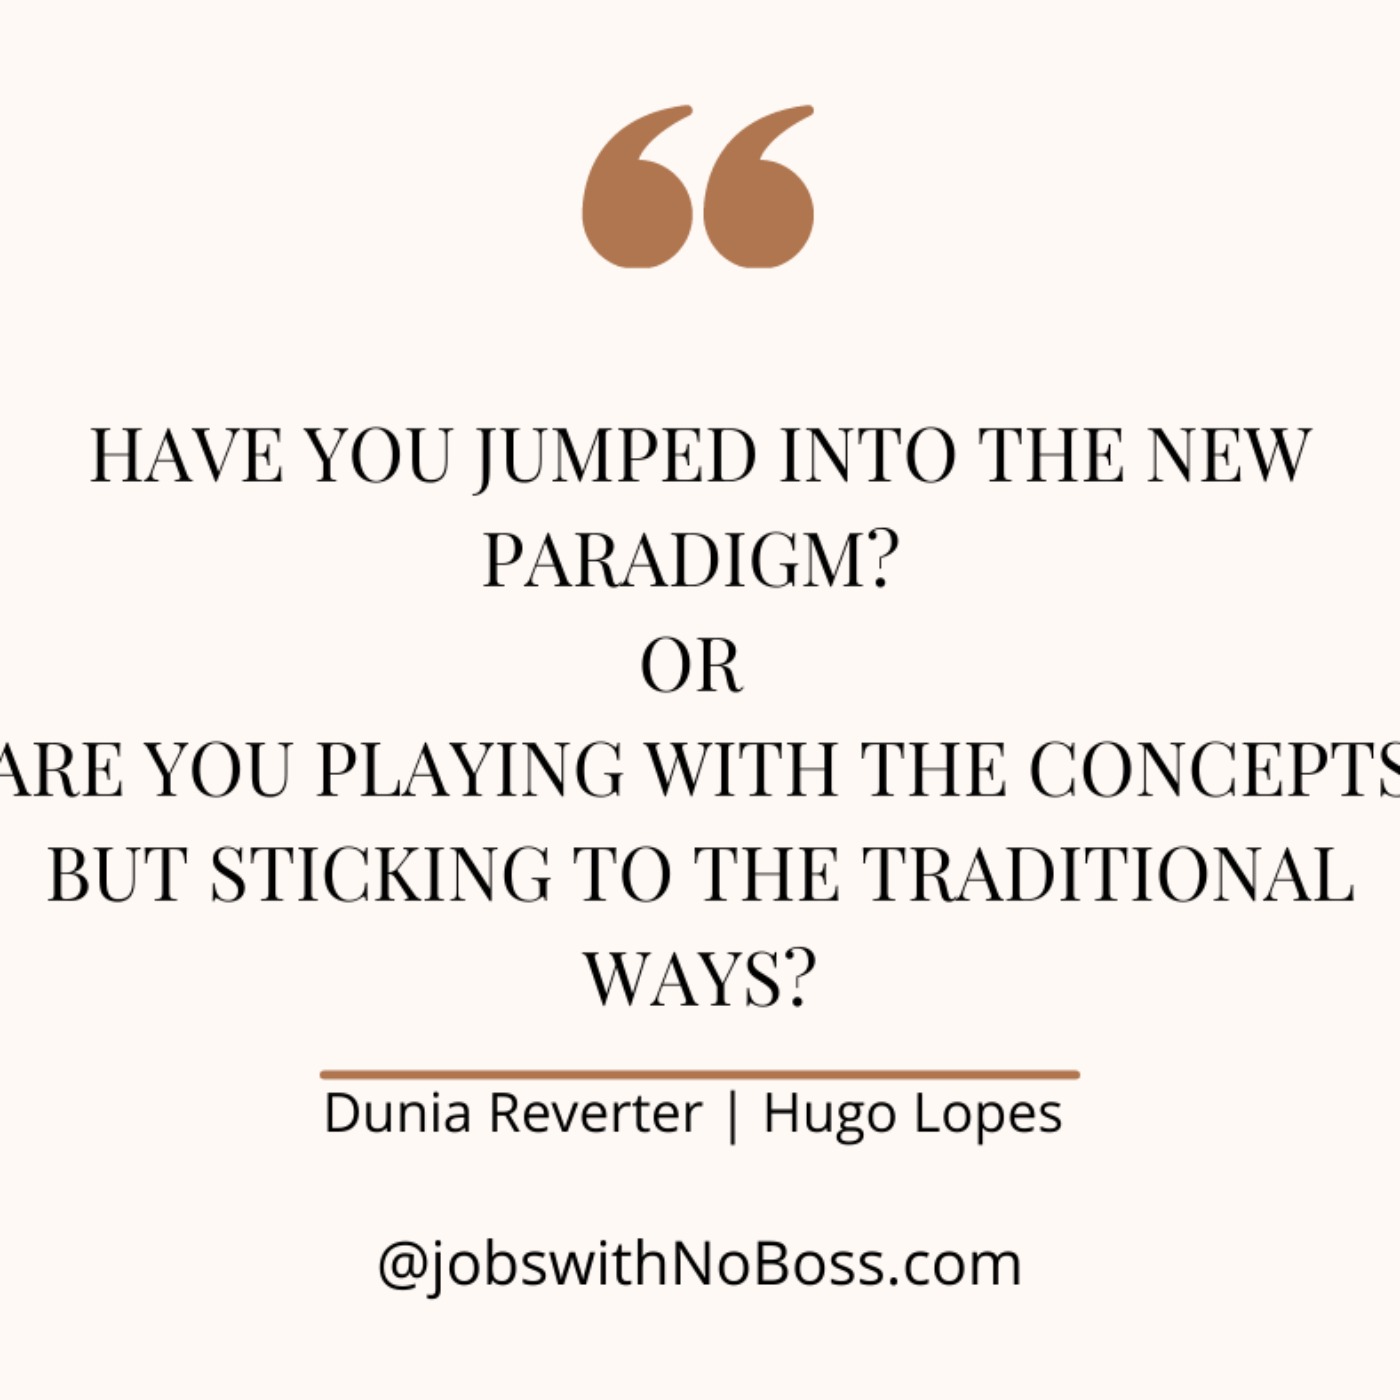 Jobs with No Boss with Dunia Reverter and Hugo Lopes